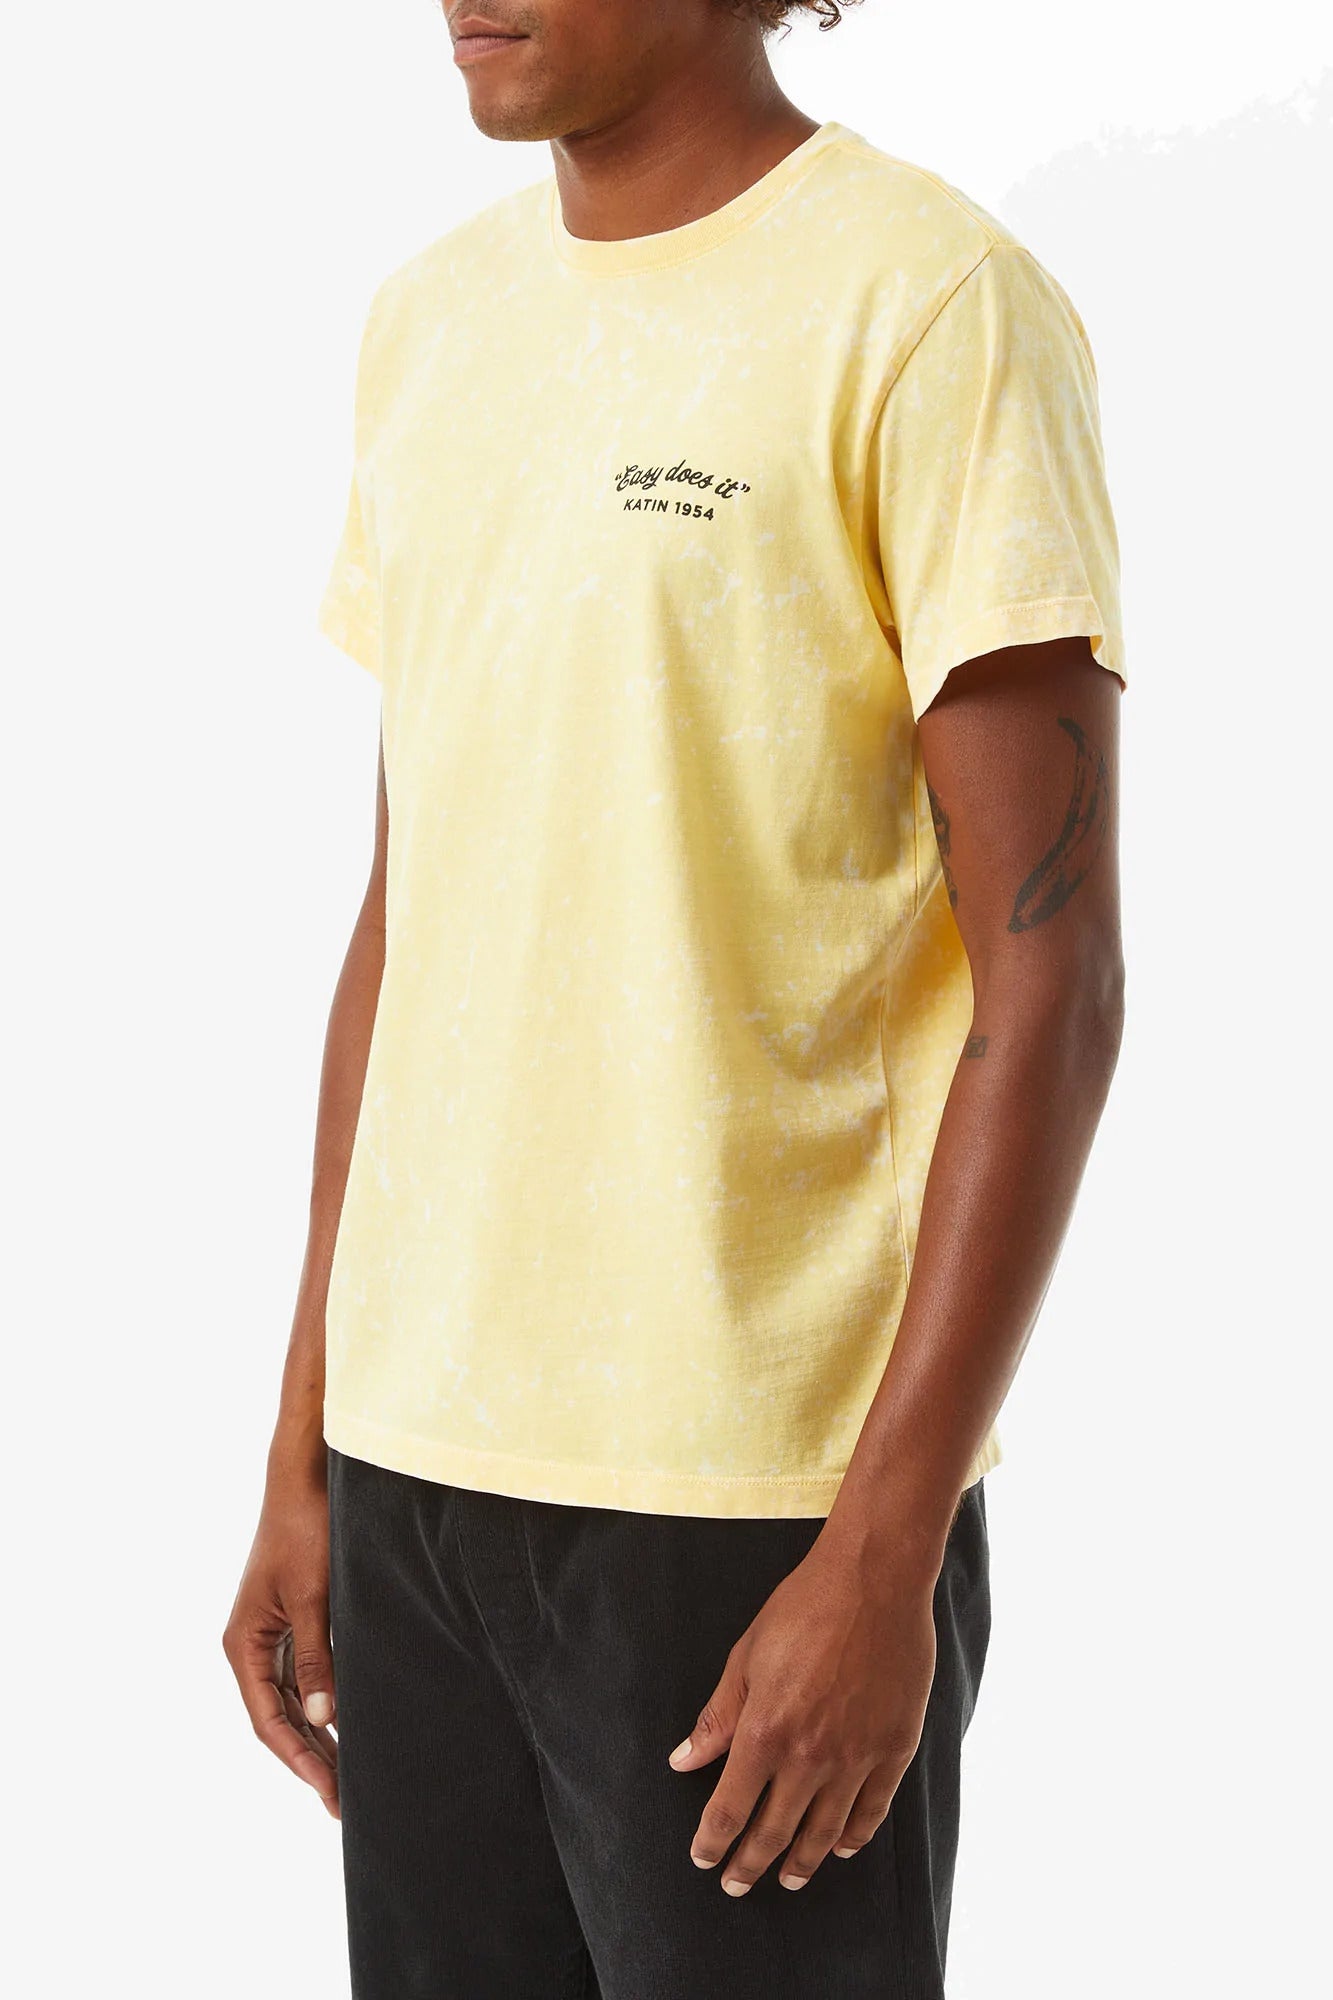 Katin Cruising Leroy SS Tee LagerMineral L